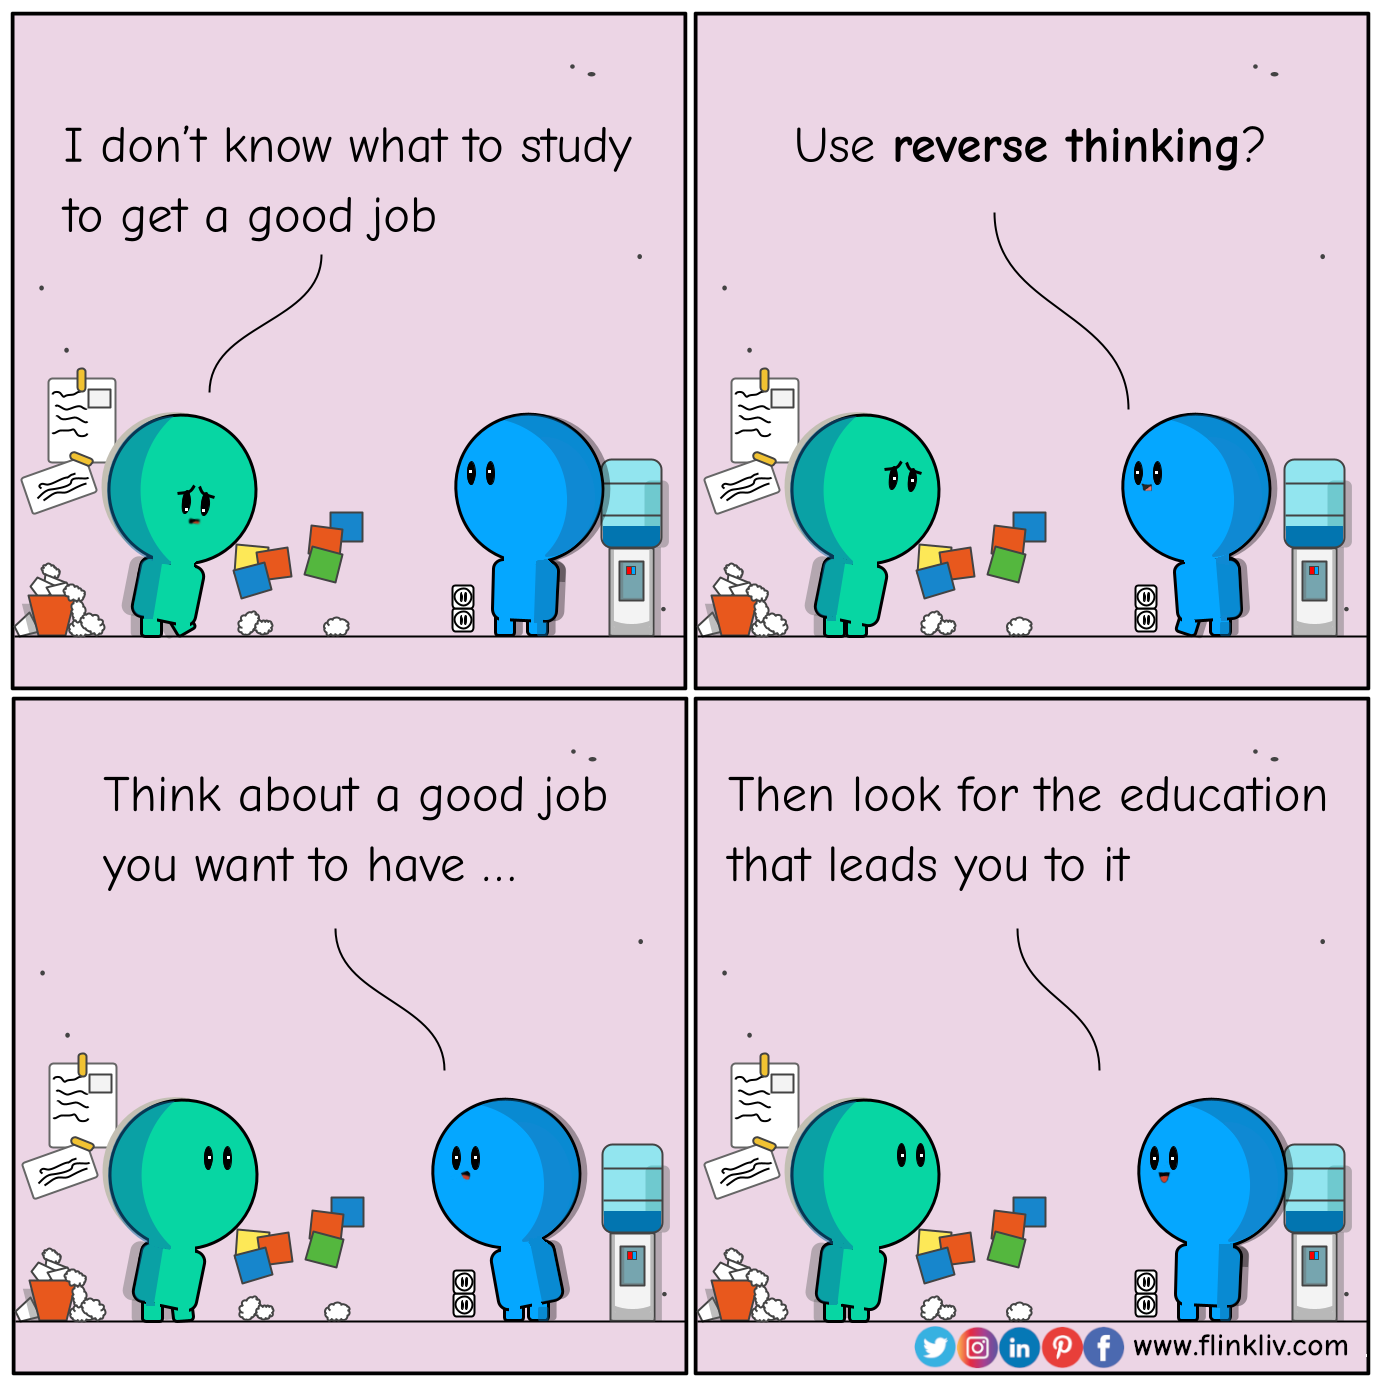 Conversation between A and B about how to get a good job with reverse thinking. A: I don’t know what to study or how to choose the right degree
              B: Why?
              A: I want to have a good job
              
              B: How about reverse thinking?
              A: What do you mean?
              
              B: Think about a good job you want to have, then look for the education that leads you to it
              A: Thanks
              